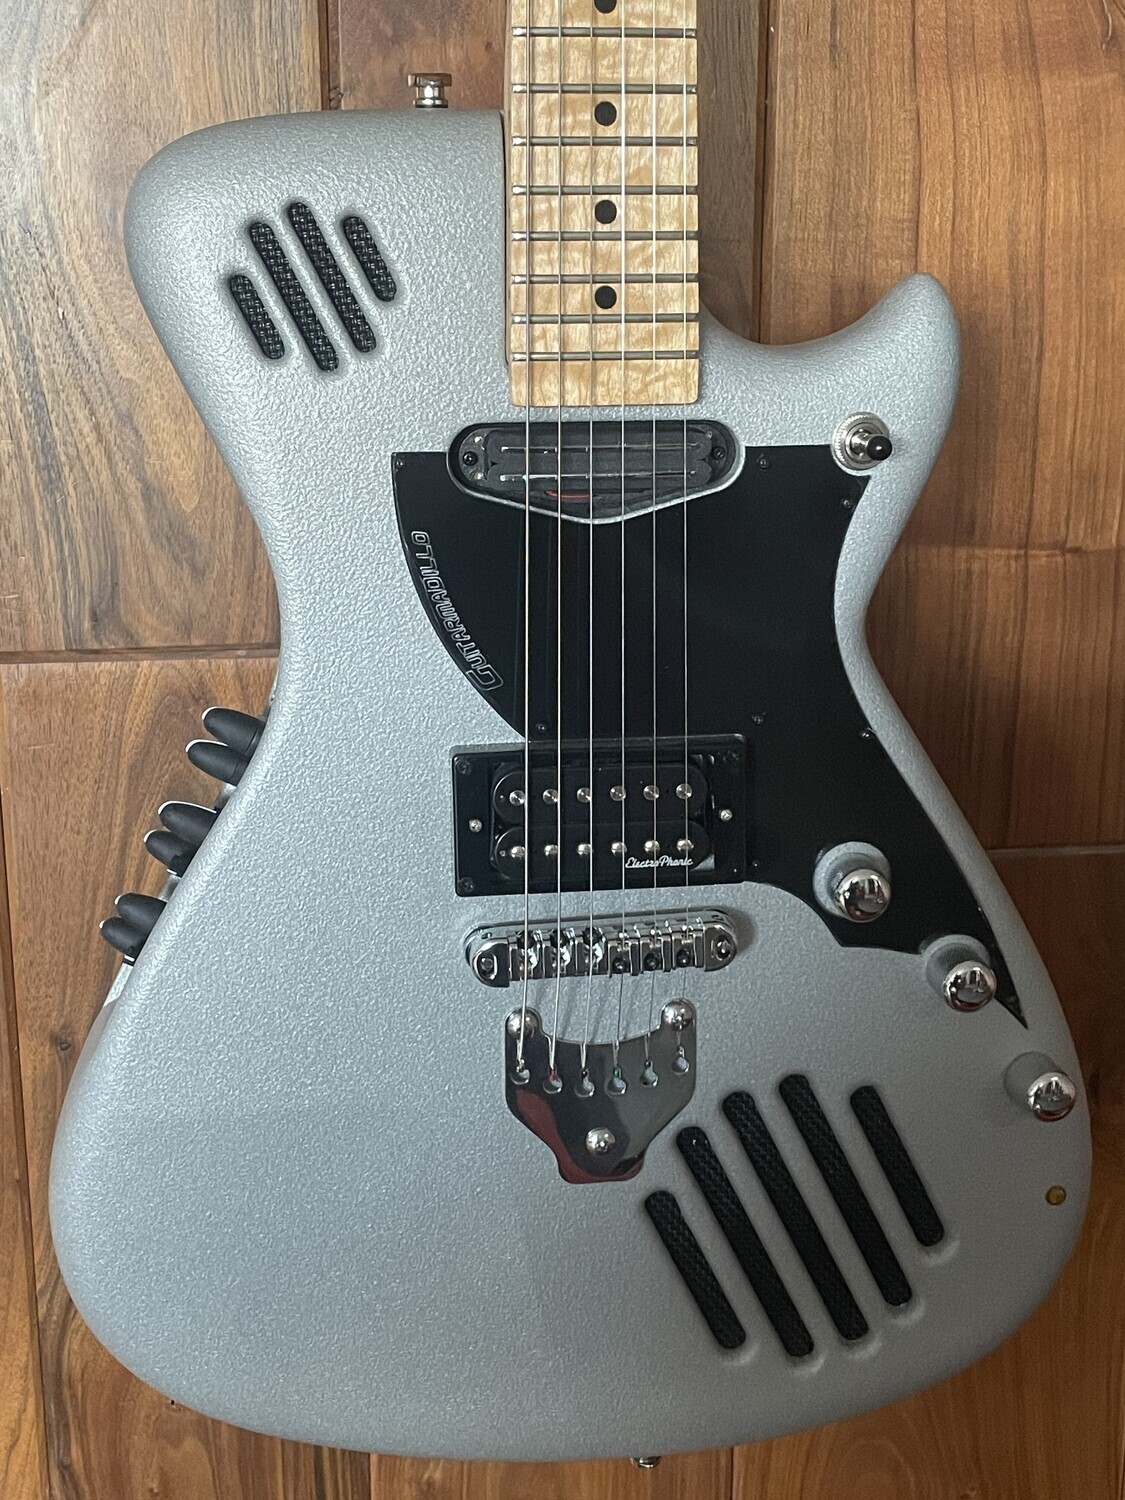 Guitarmadillo - Standard Silver with Roasted Maple neck